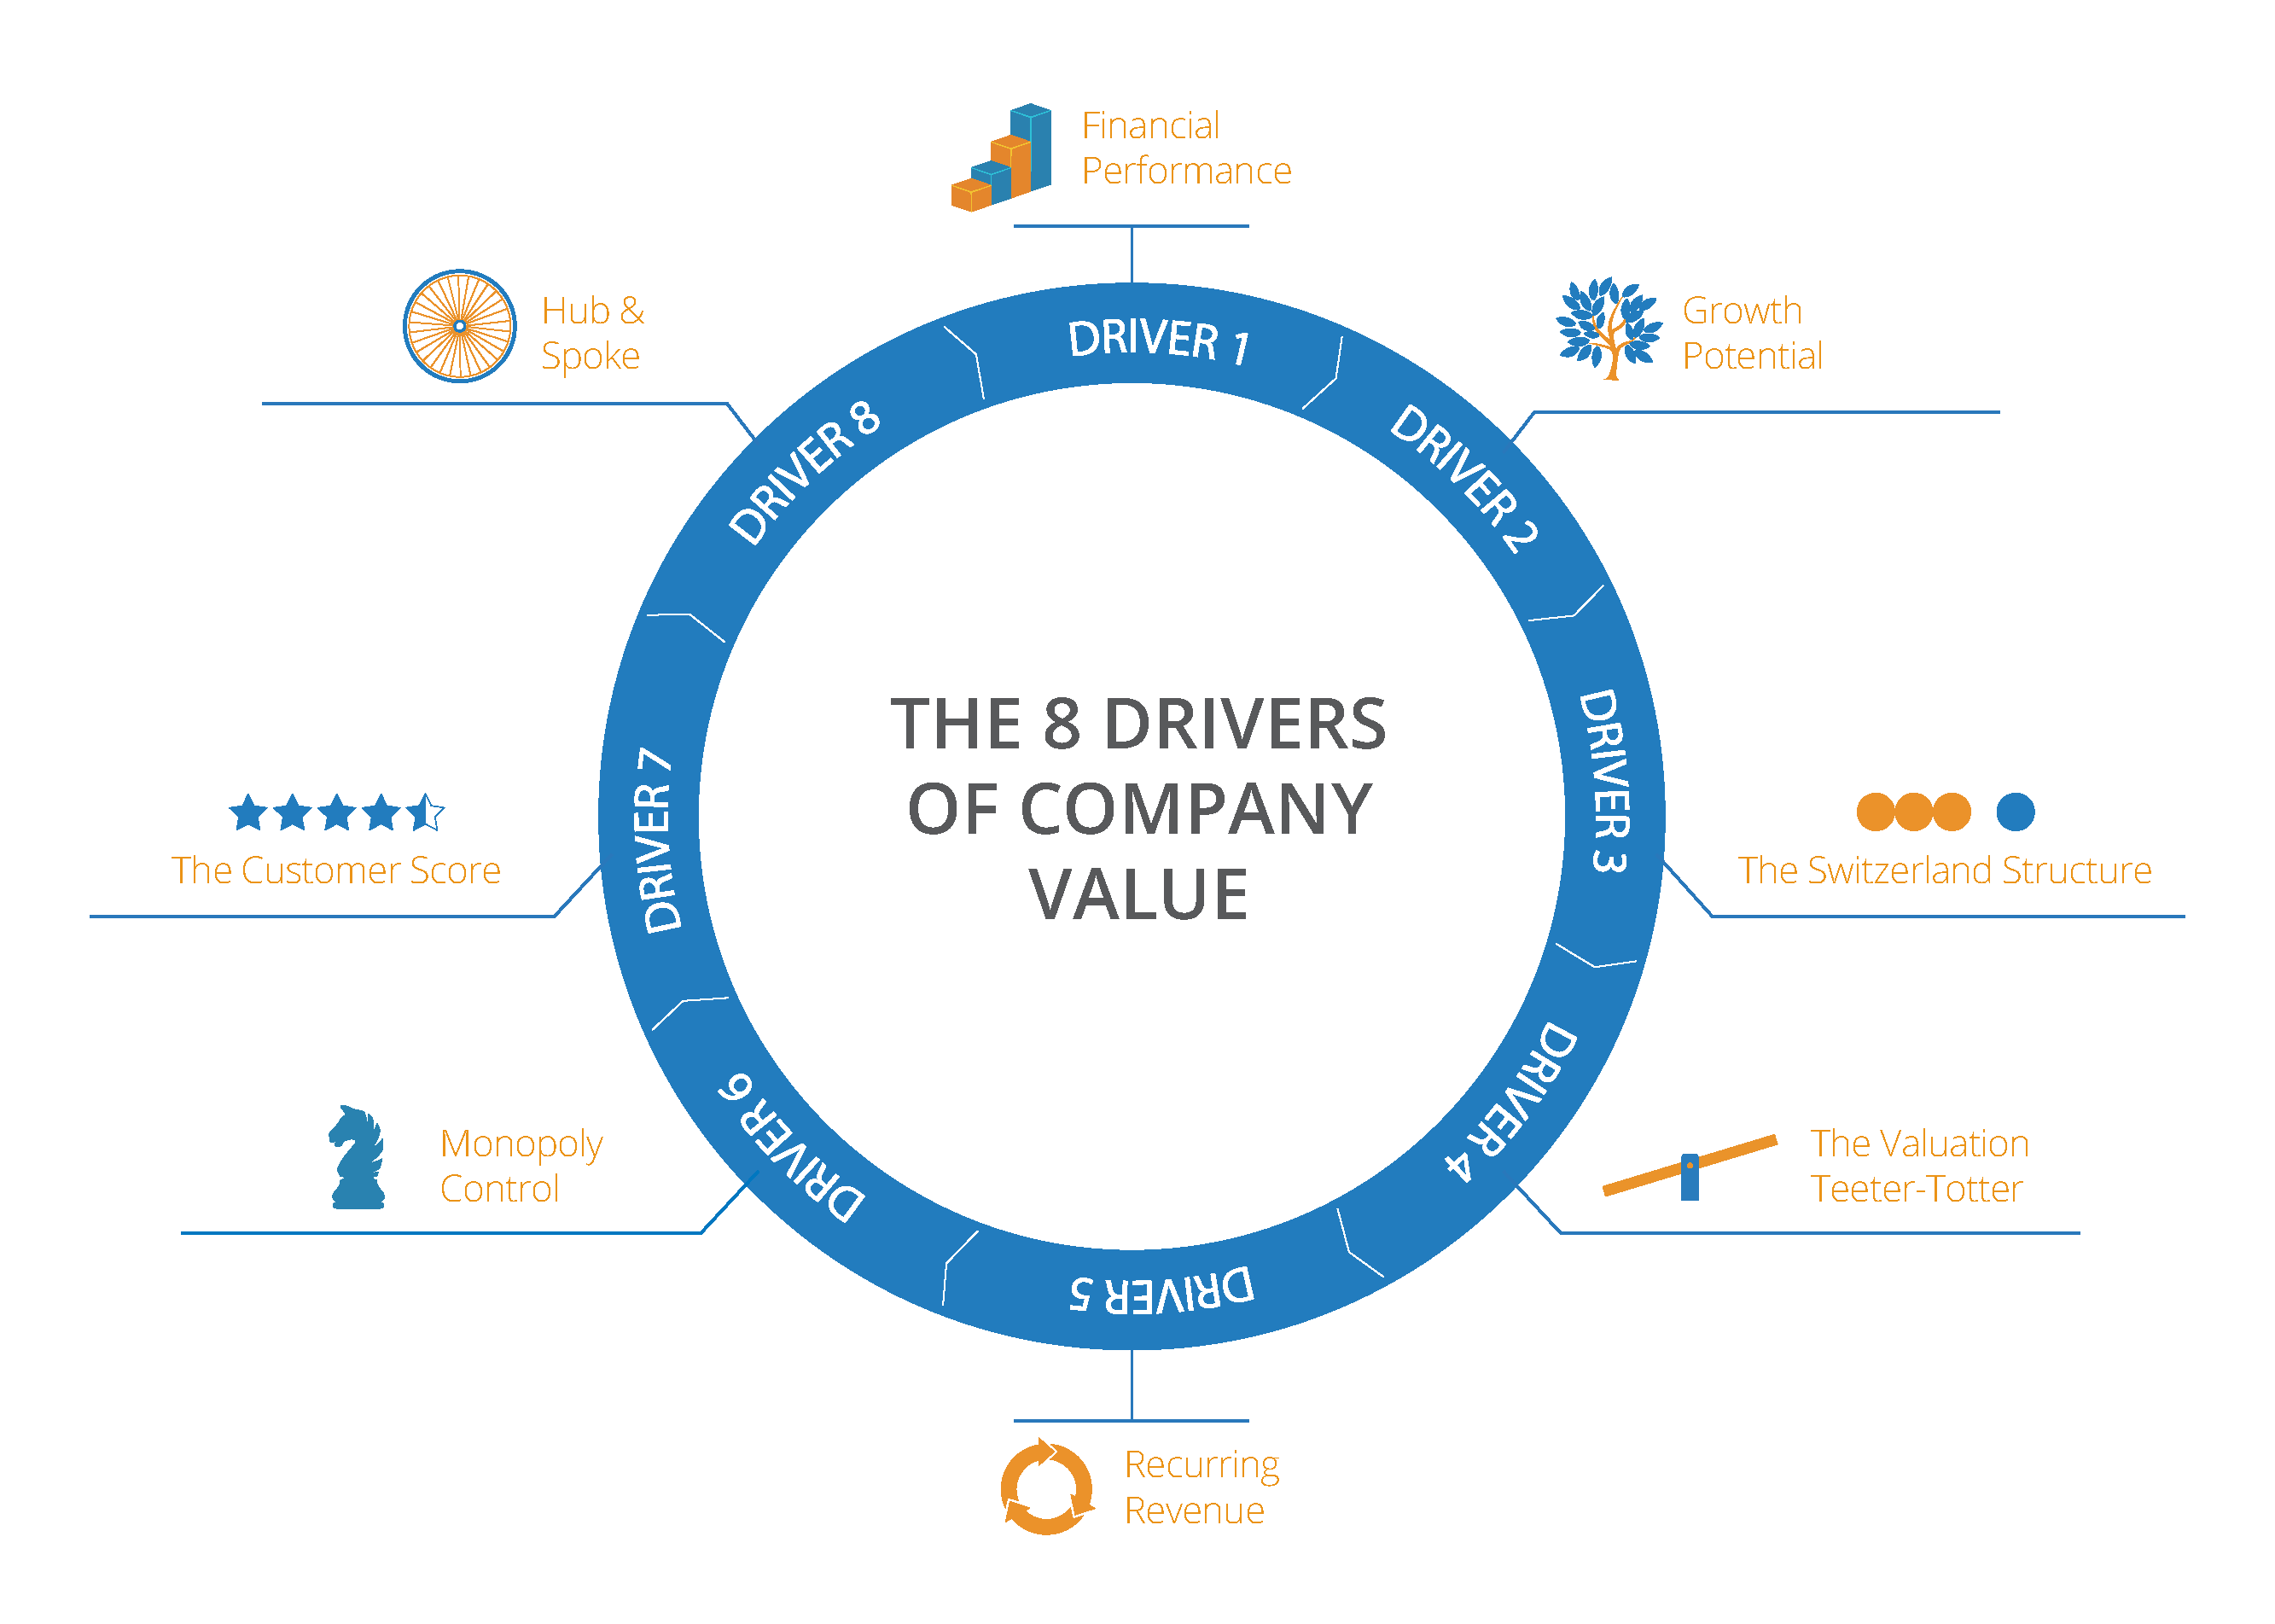 The 8 Drivers of Company Value